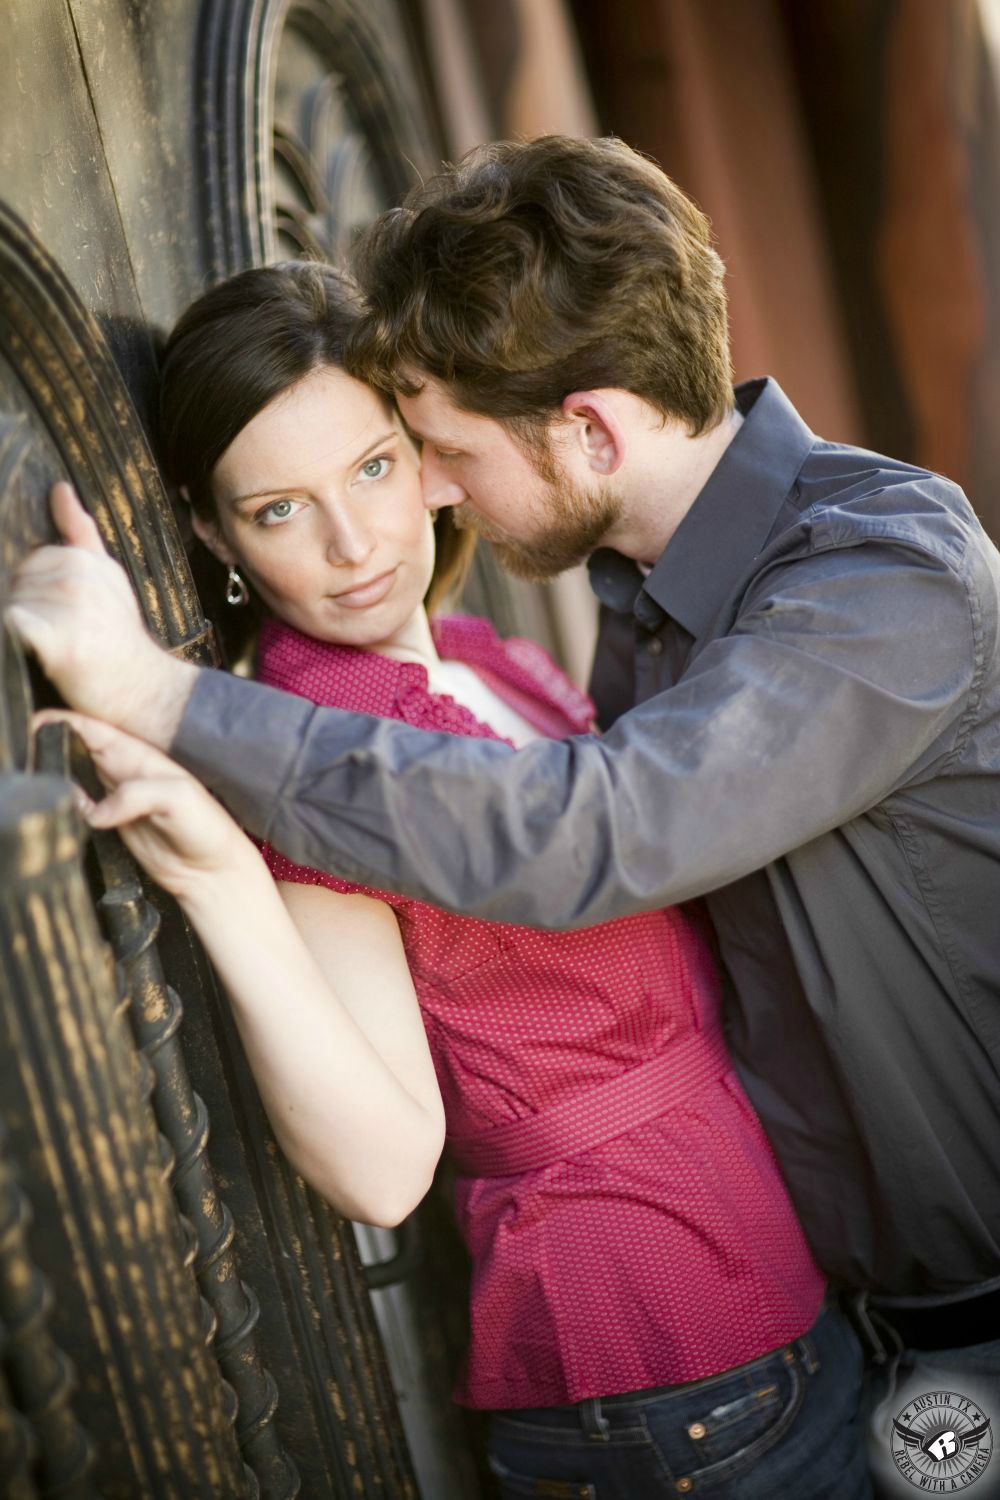 Blue eyed, brown hair girl wearing a pink low cut blouse with blue jeans is pressed against a gothic styled door by a brunette bearded guy wearing a grey long sleeve button up shirt in this intense engagement portrait in the warehouse district of Austin.